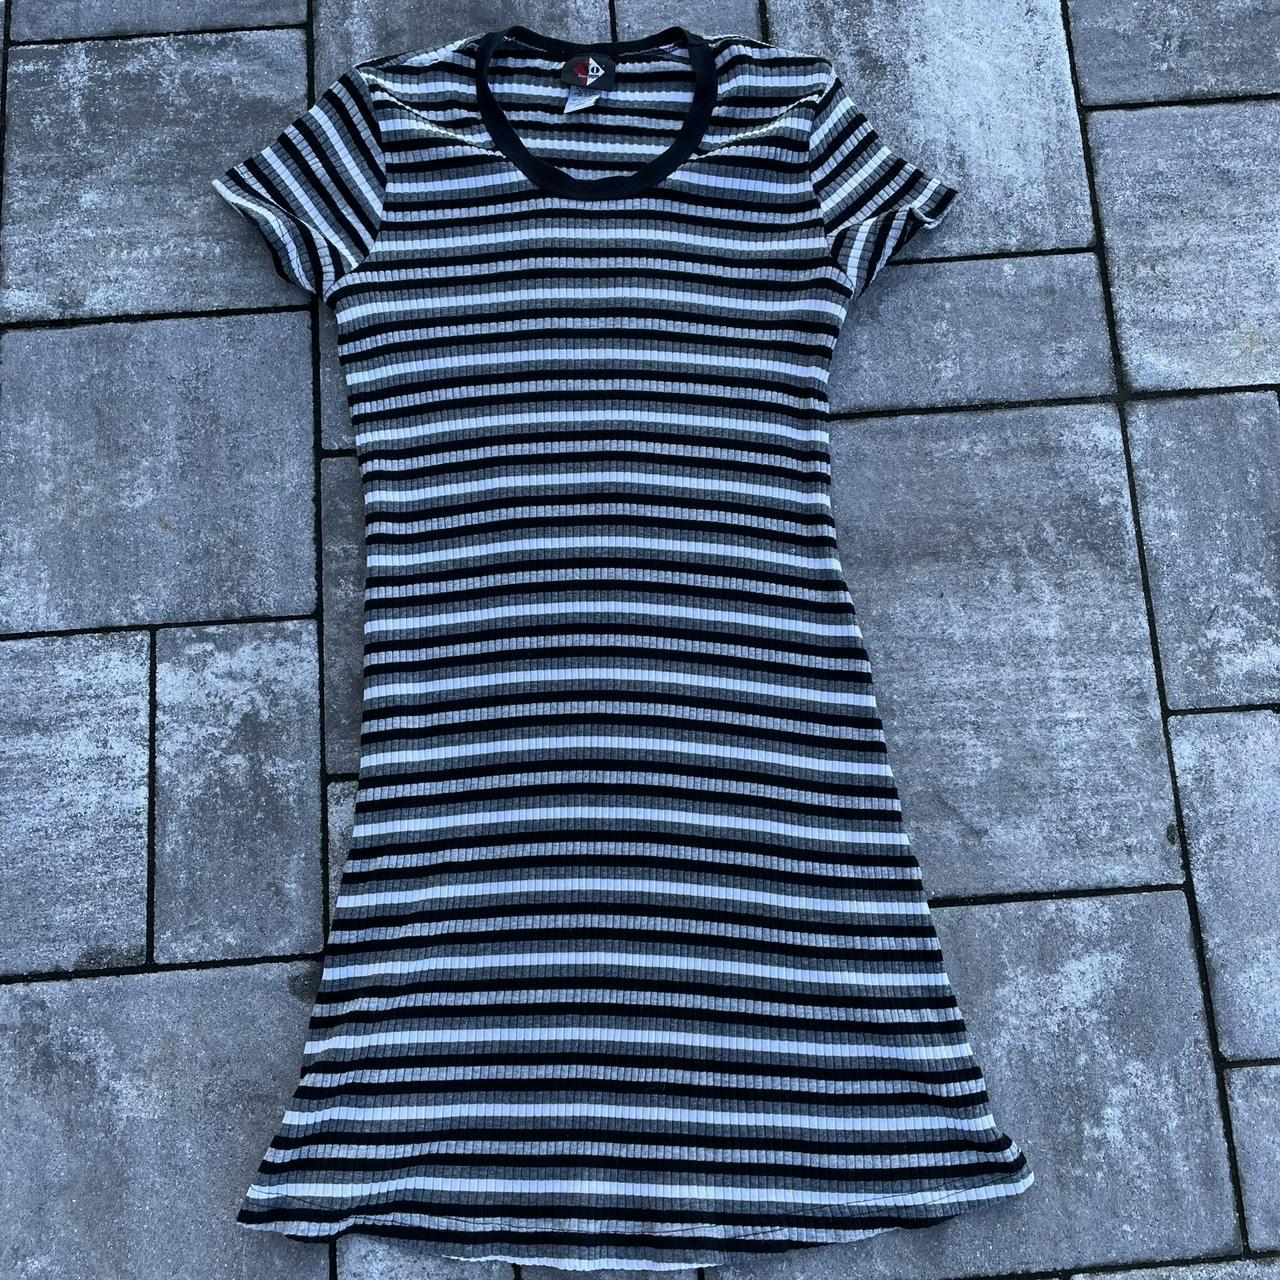 Awesome 90s/Y2K No Boundaries dress. Made in USA, - Depop